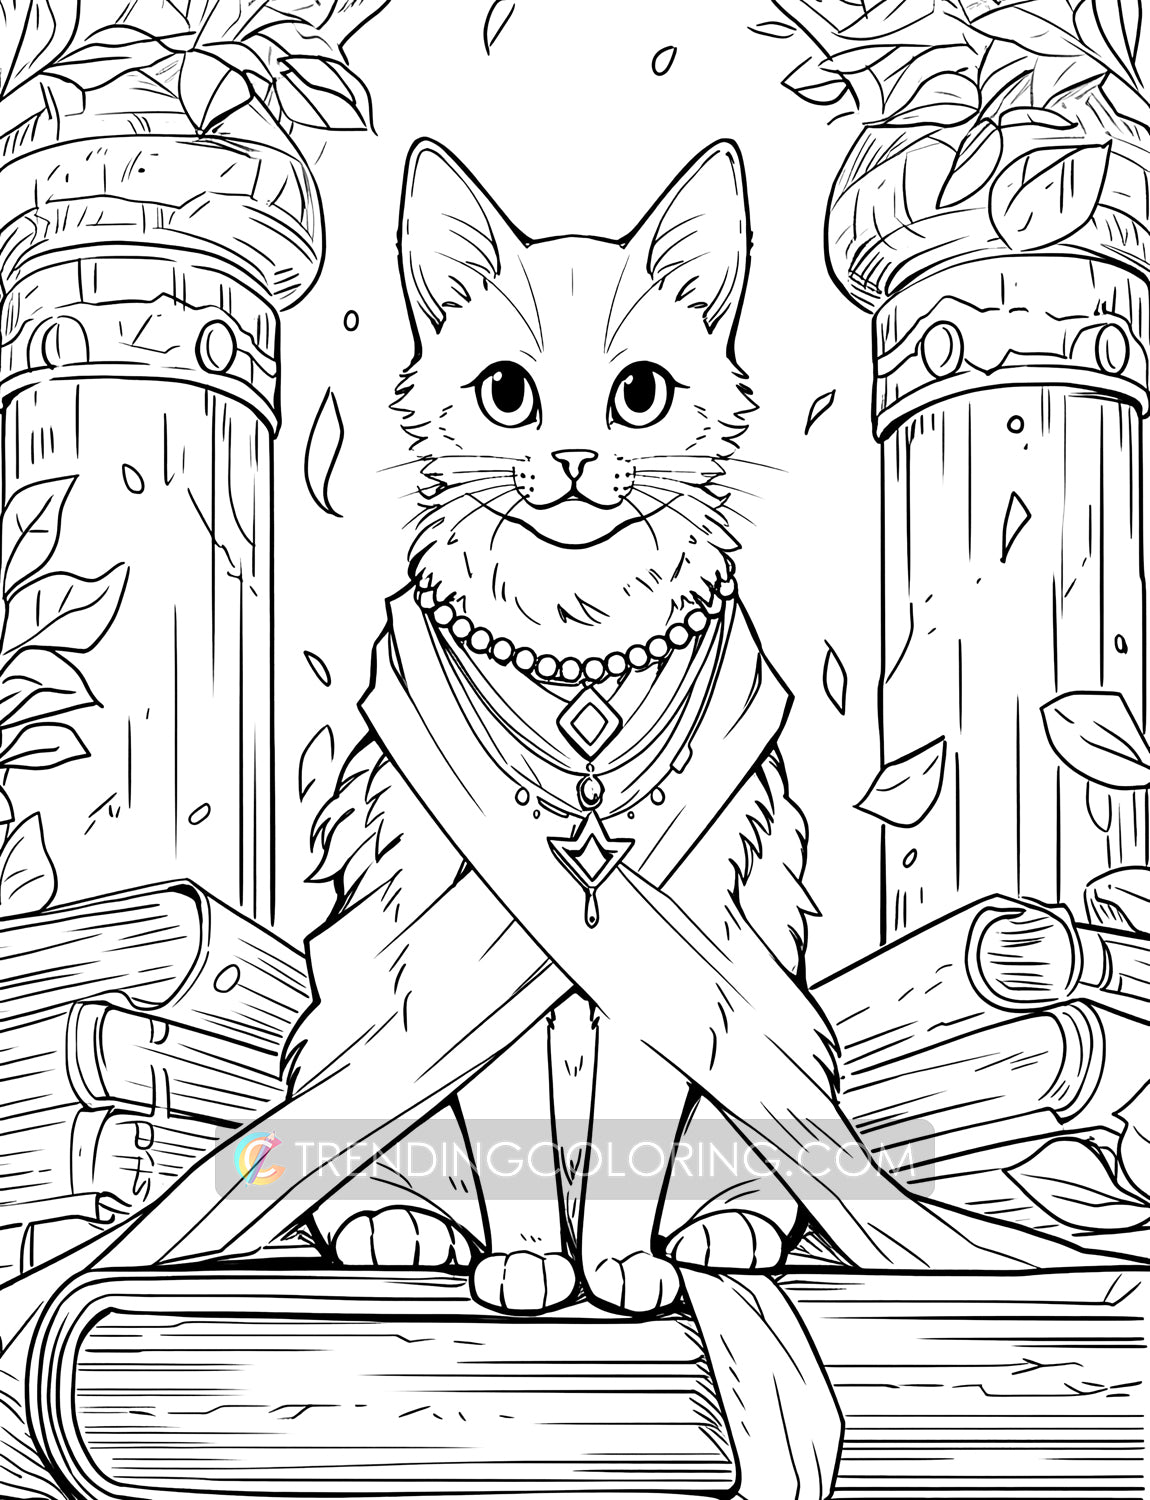 25 Meowloween Coloring Pages - Halloween Coloring - Instant Download - Printable PDF